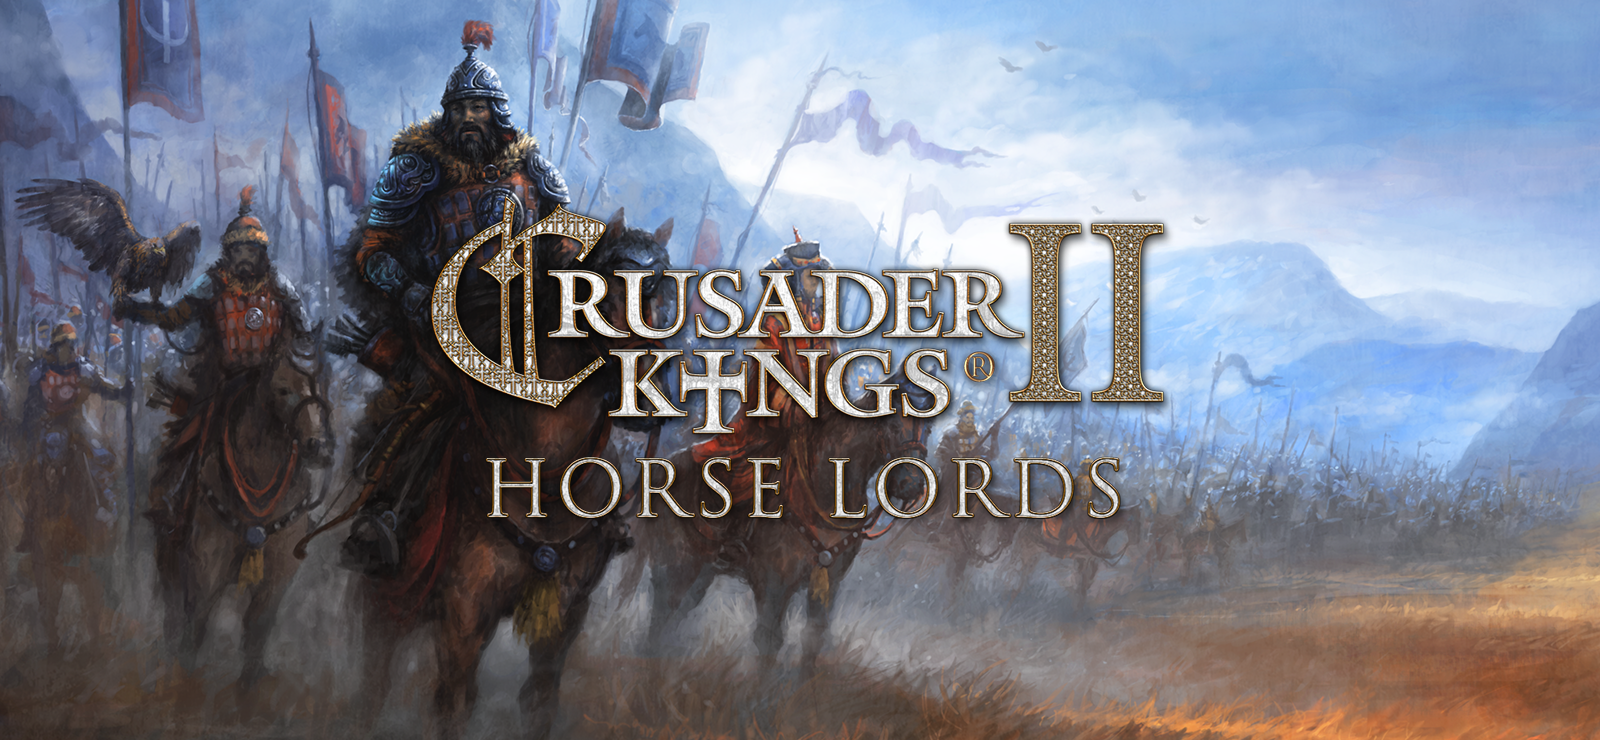 Expansion - Crusader Kings II: Horse Lords